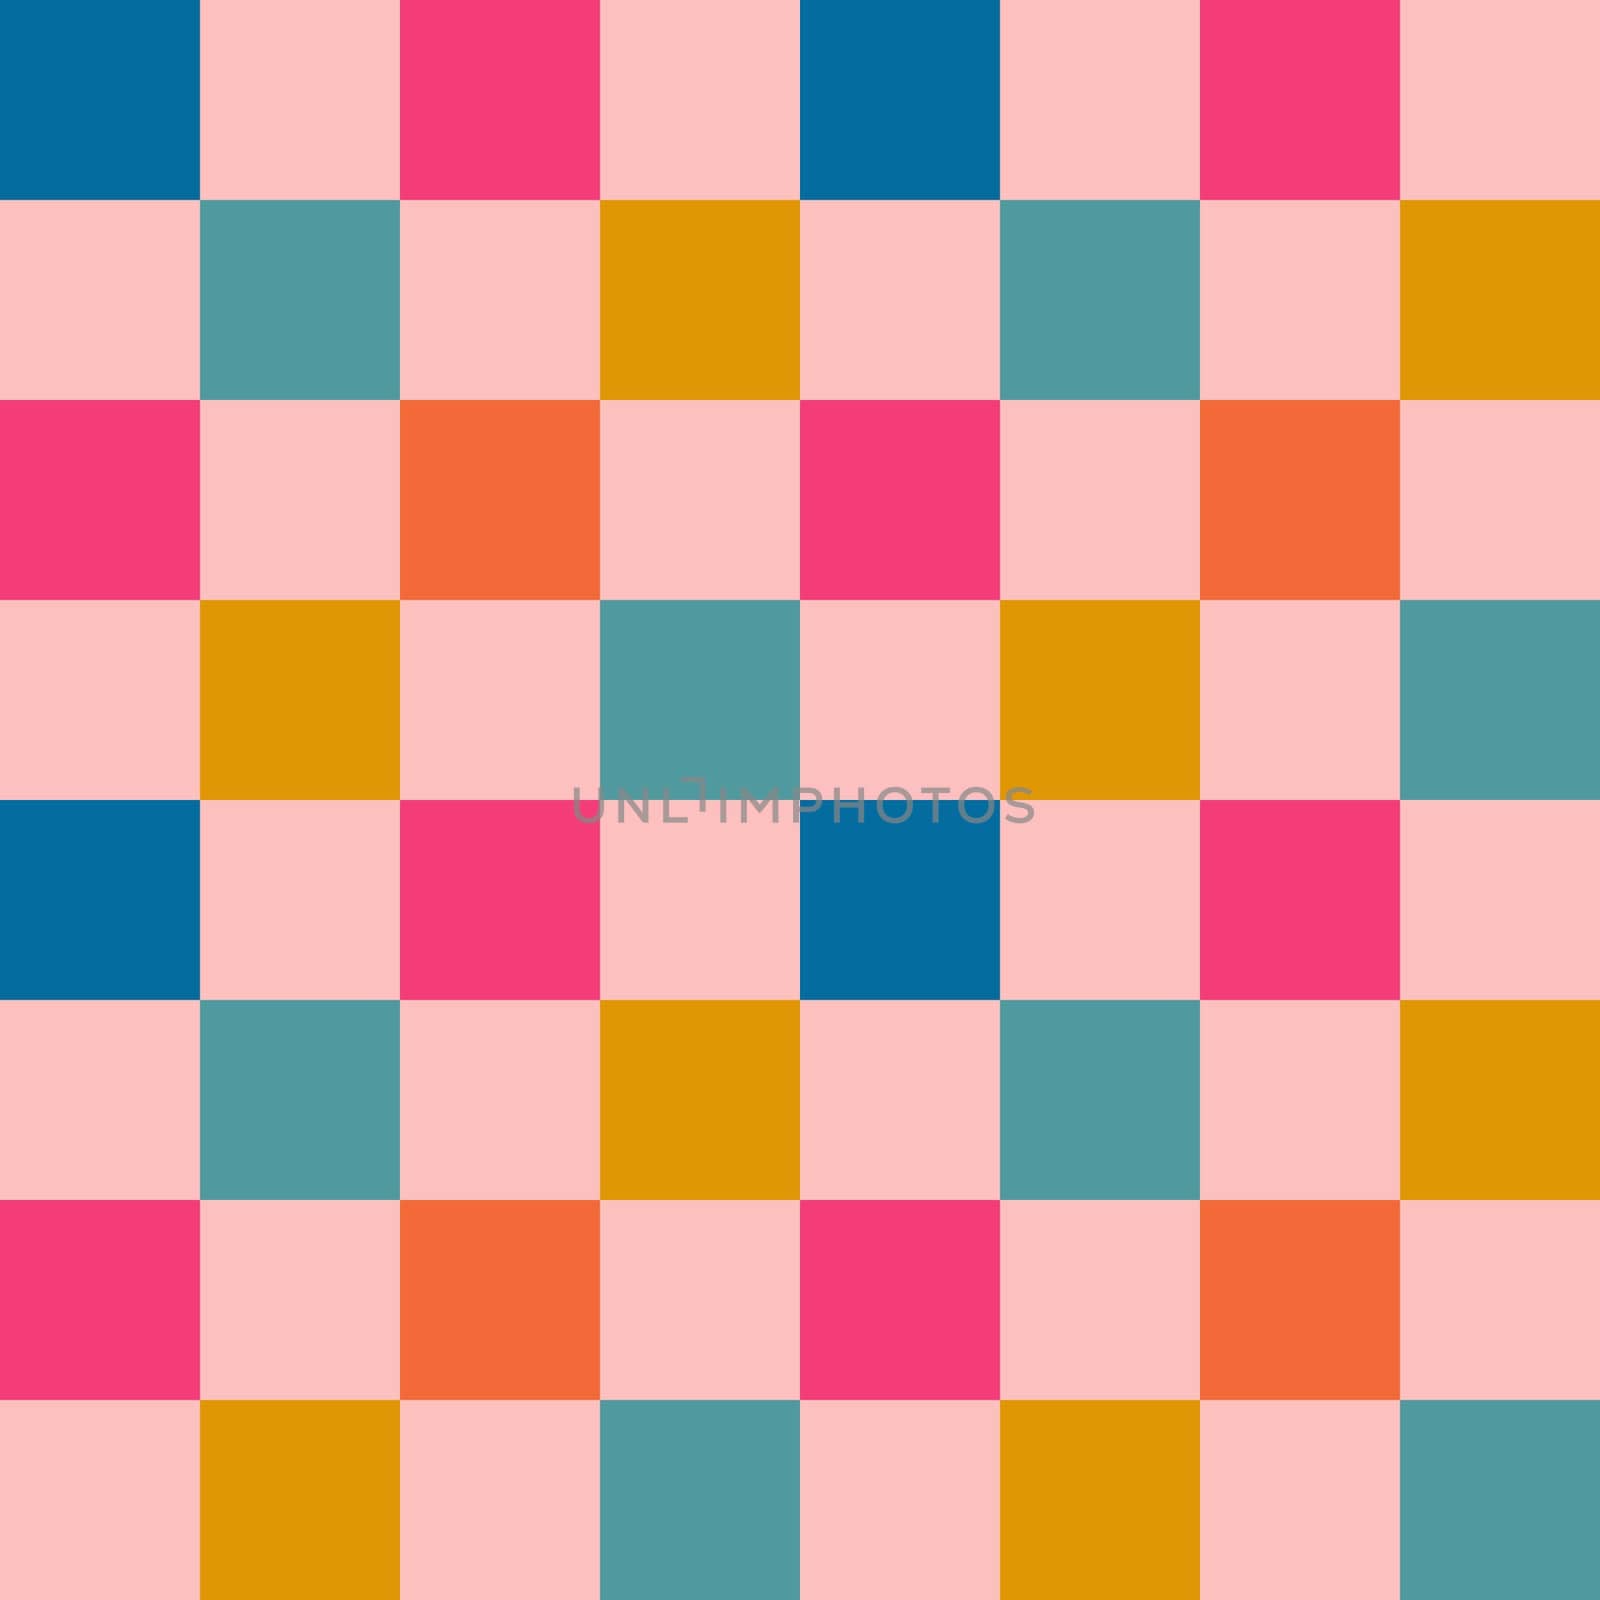 Hand drawn seamless pattern with colorful checks squares, pink blue yellow orange checkered checkerboard, mid century modern design style, contemporary abstract geometric print, 80s 90s retro art